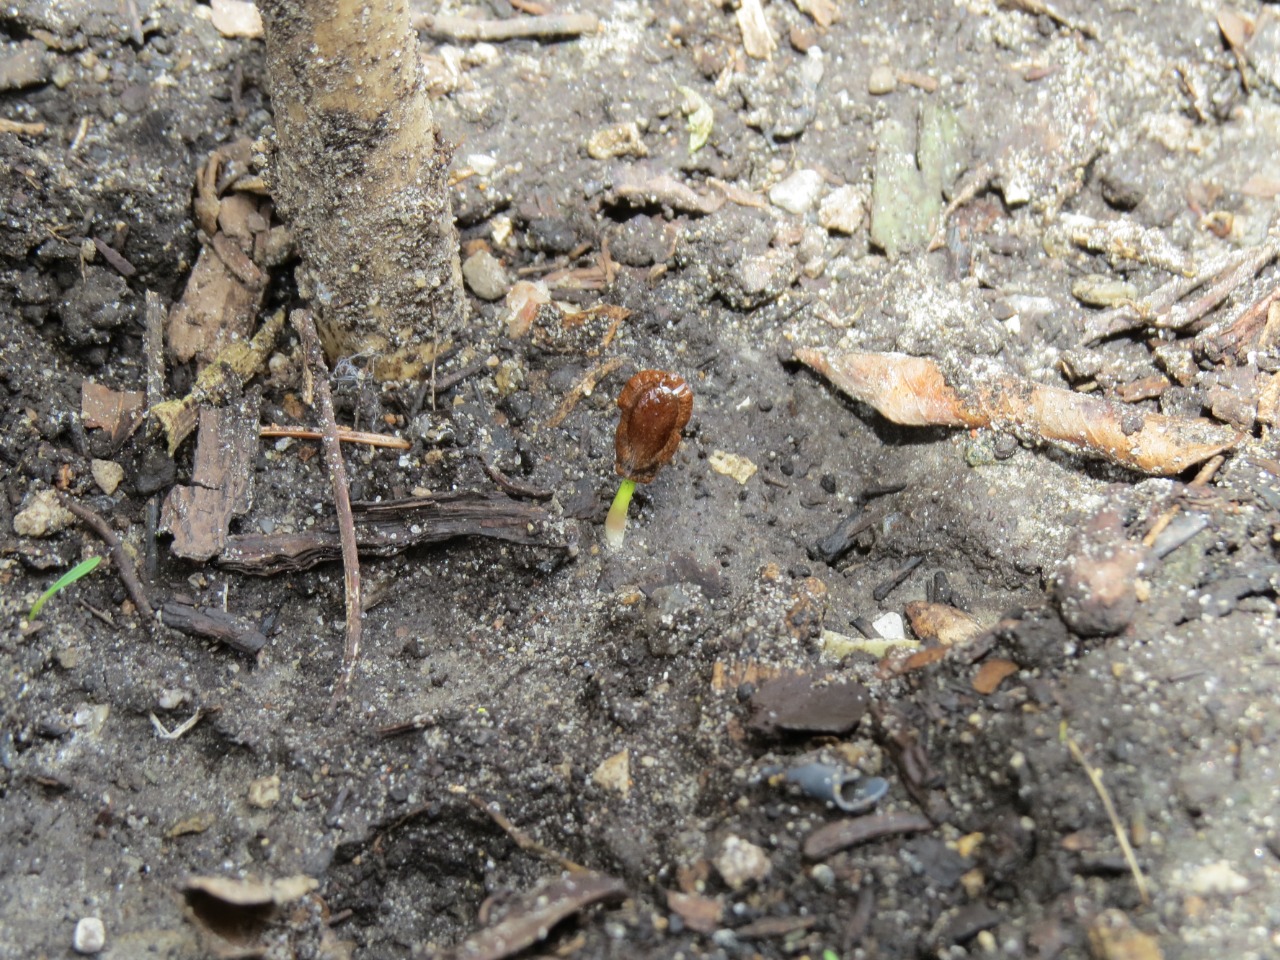 A milkweed plant just barely pokes out of the dirt